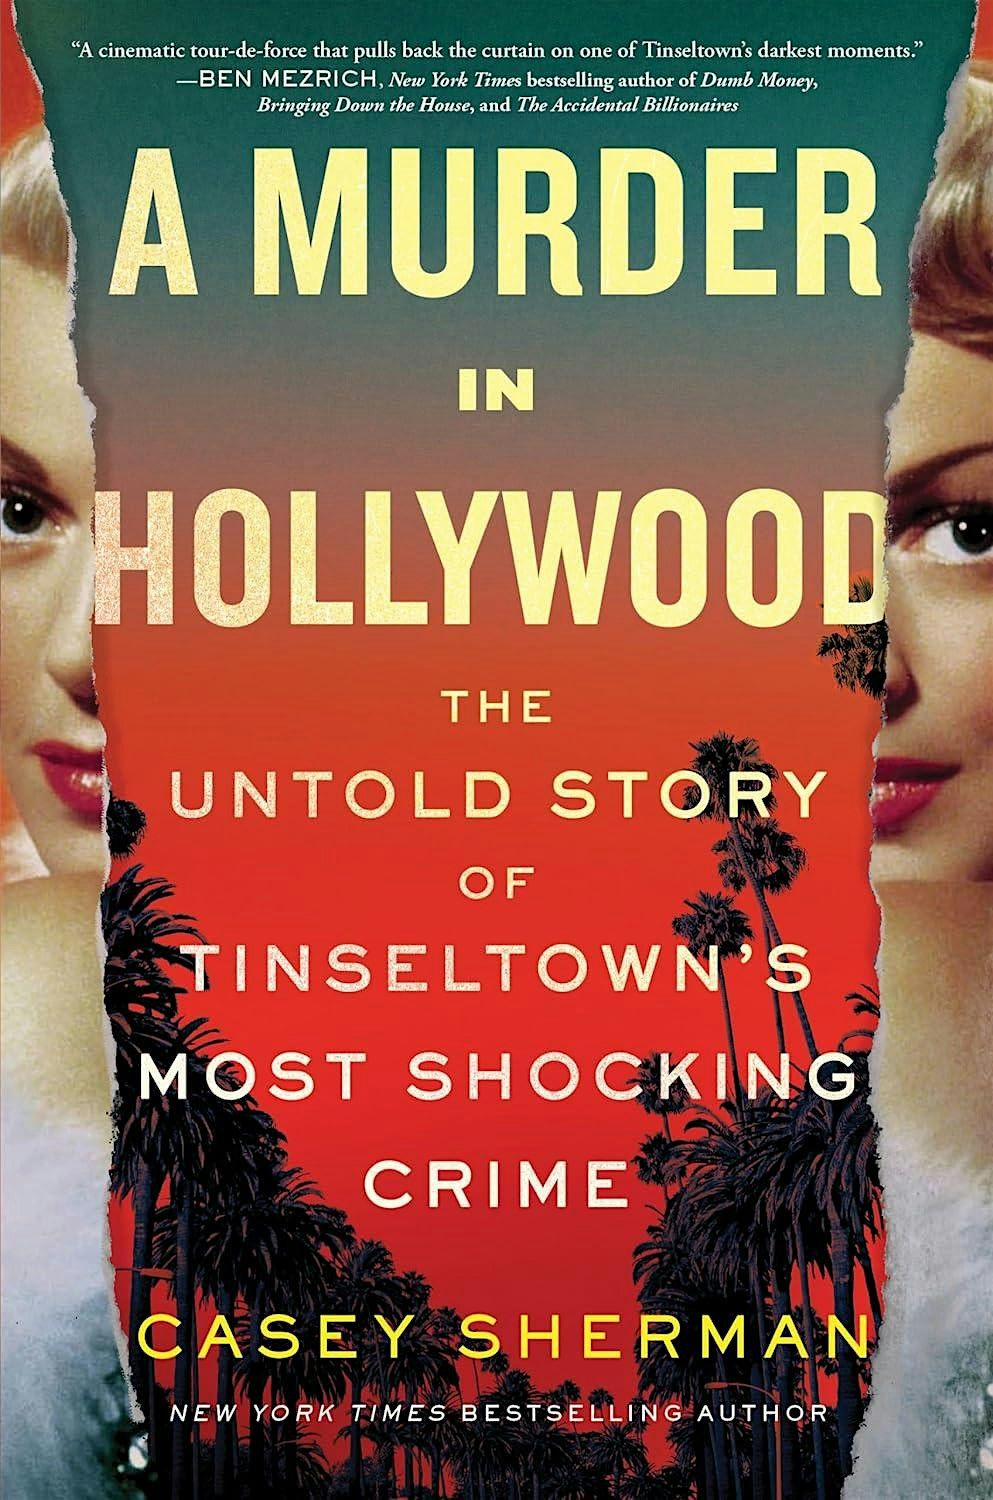 A M**der in Hollywood: The Untold Story of Tinseltown's Most Shocking Crime